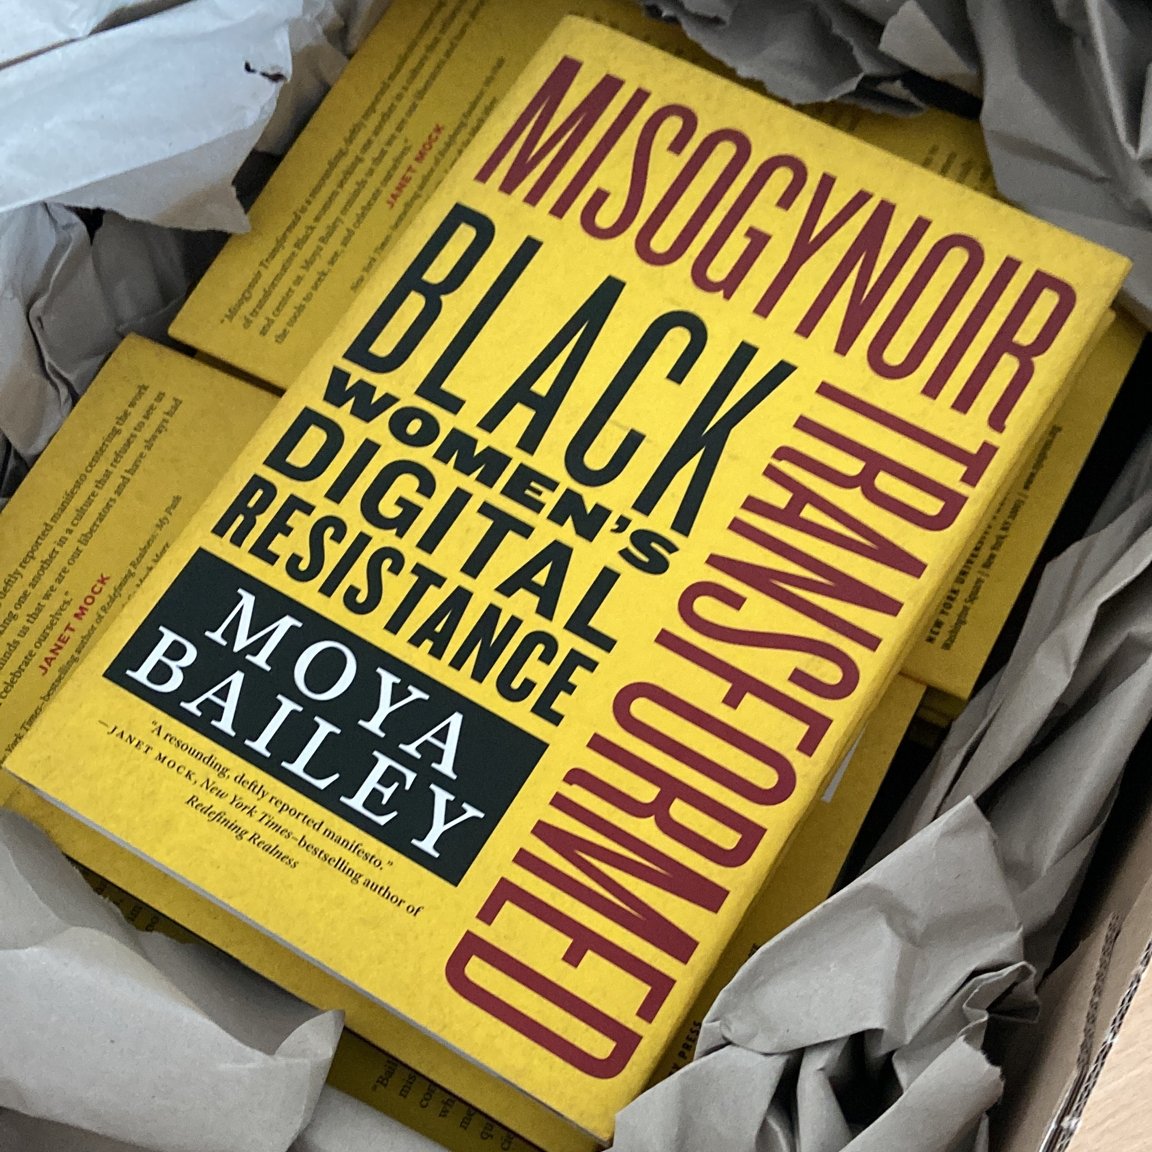 What a beautiful day! 📚📖Finally, the #MisogynoirTransformed books by @moyazb have arrived! in the next days we will be sending them to the lucky winners. Thanks again to Moya Bailey for generously sponsoring us to purchase the books! @GSW_TUDresden #GenderConceptGroup